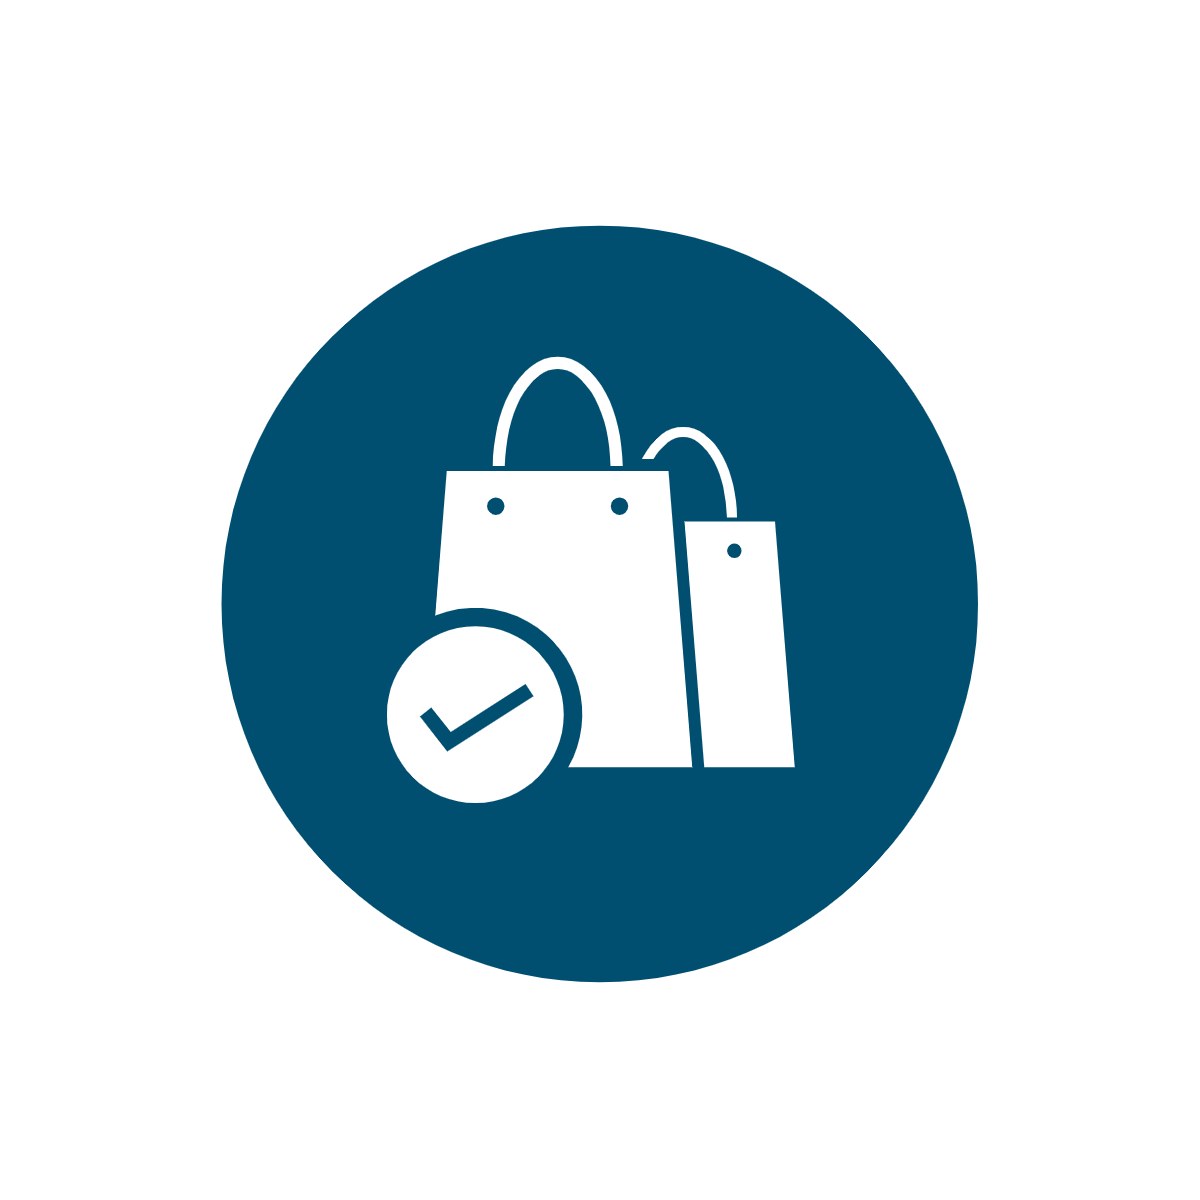 A blue icon circle of shopping bags with a checkmark overlaid.